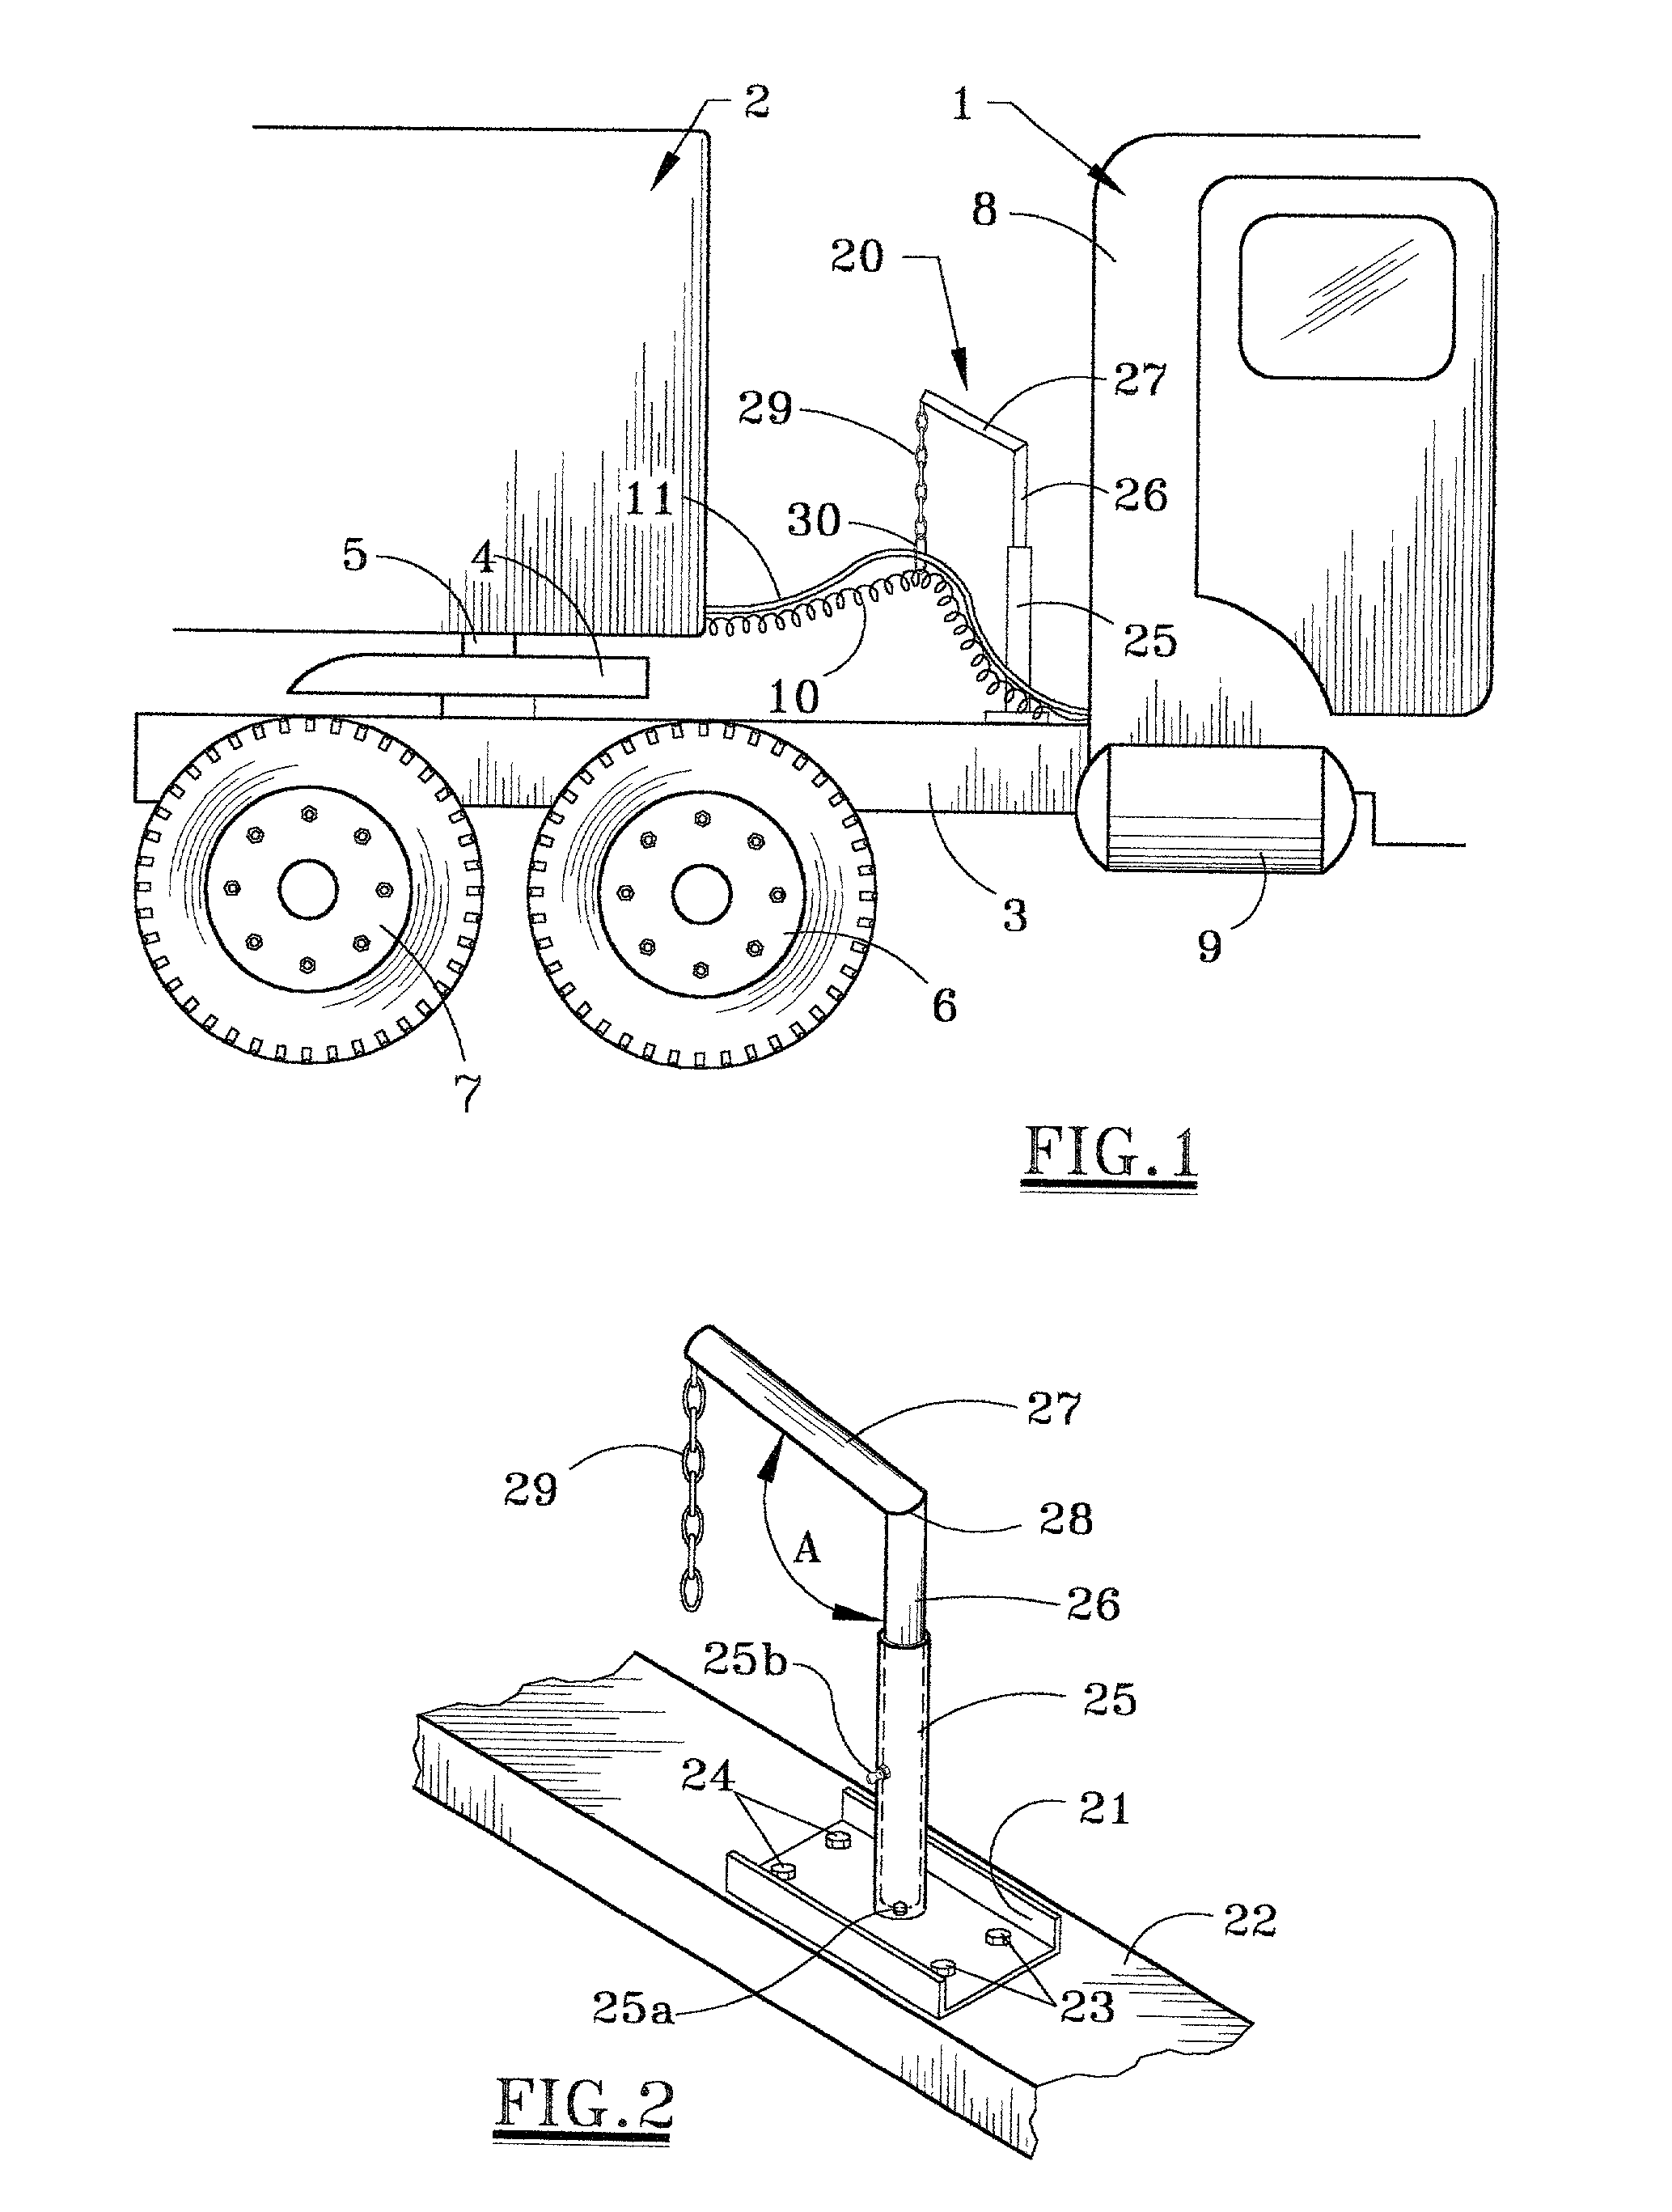 Tractor-trailer support apparatus